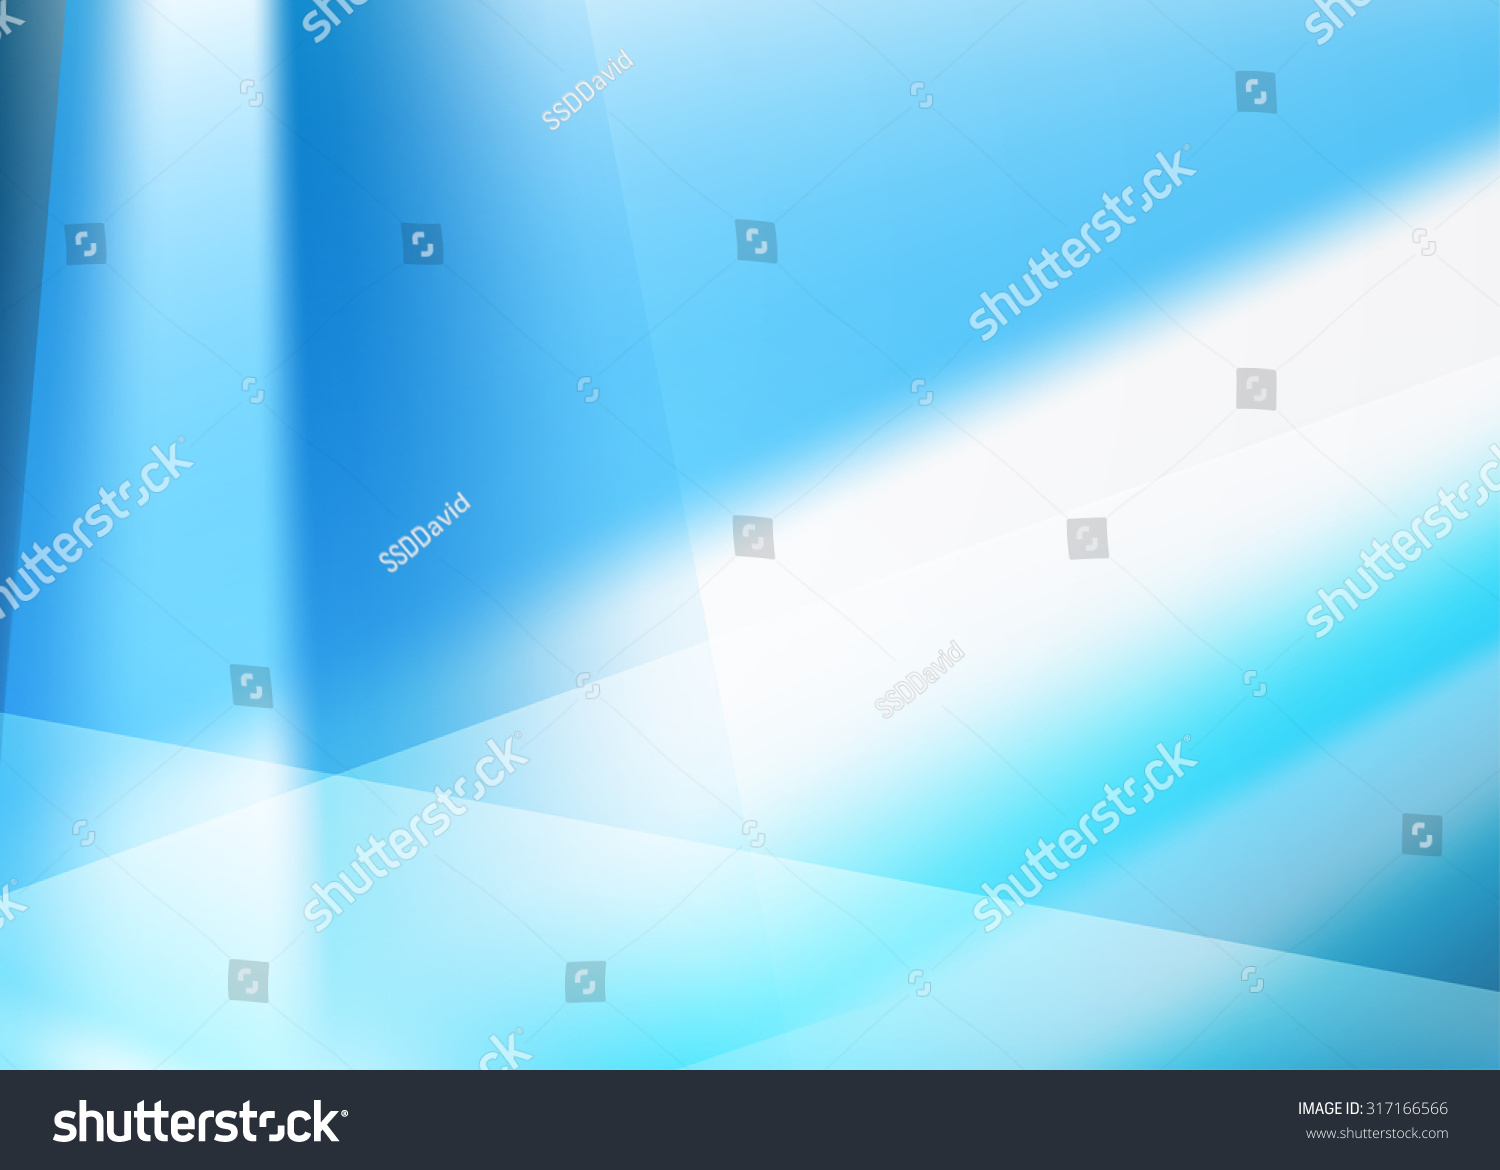 Blue Abstract Background Stock Illustration 317166566 - Shutterstock